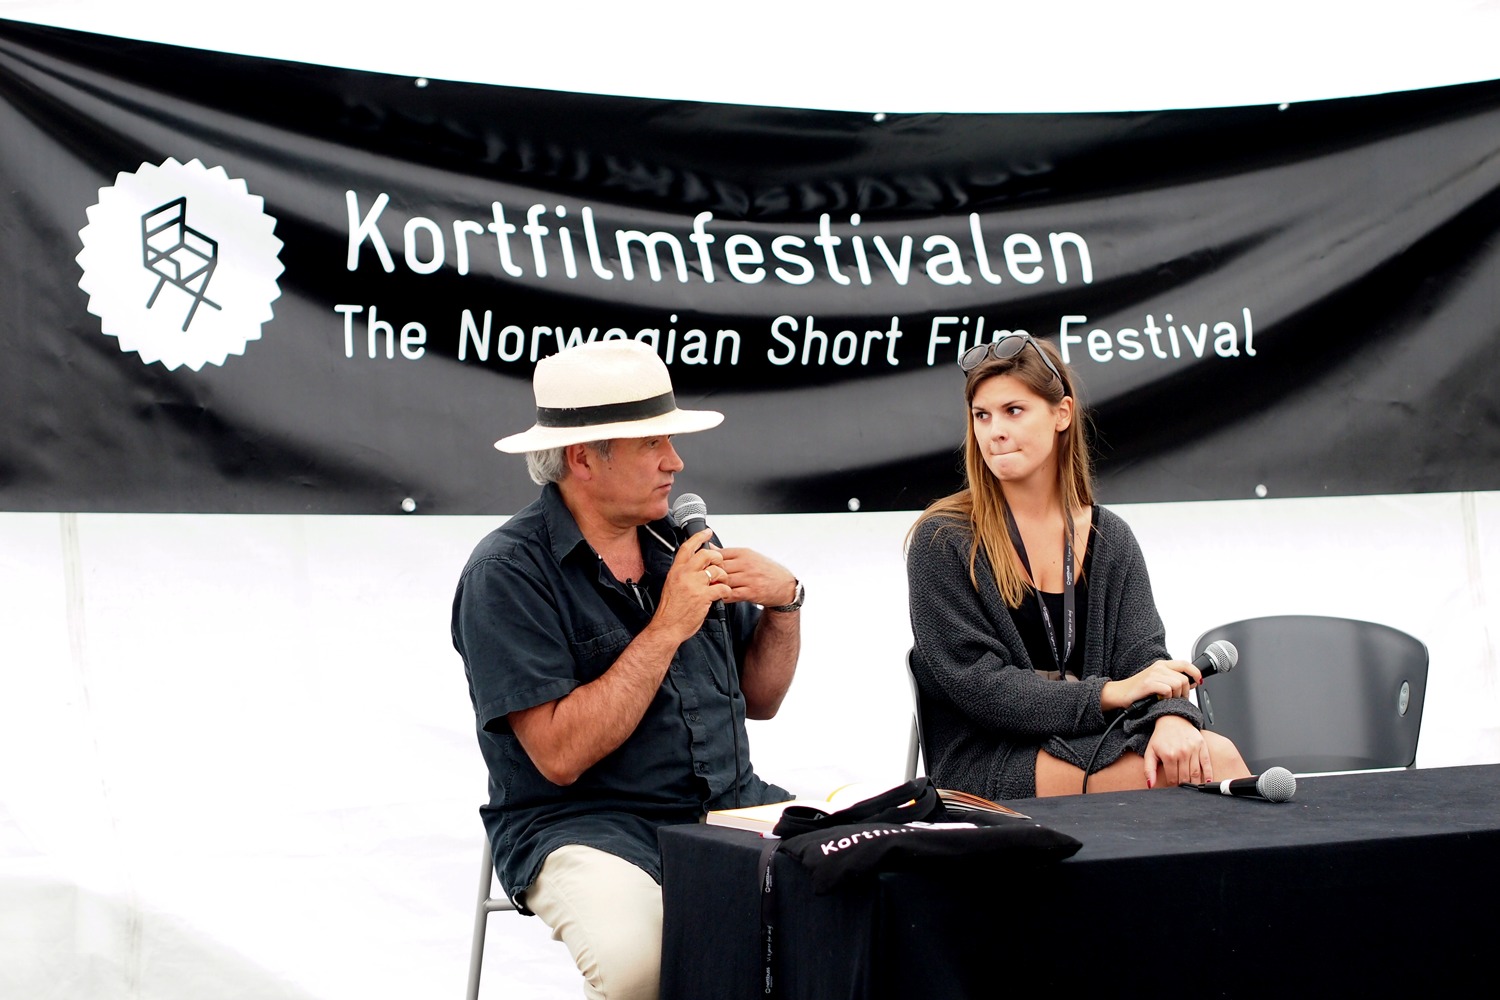 Q&A with director Christine Stronegger at The Norwegian Short Film Festival with her short film BLIKKFANG, 2013